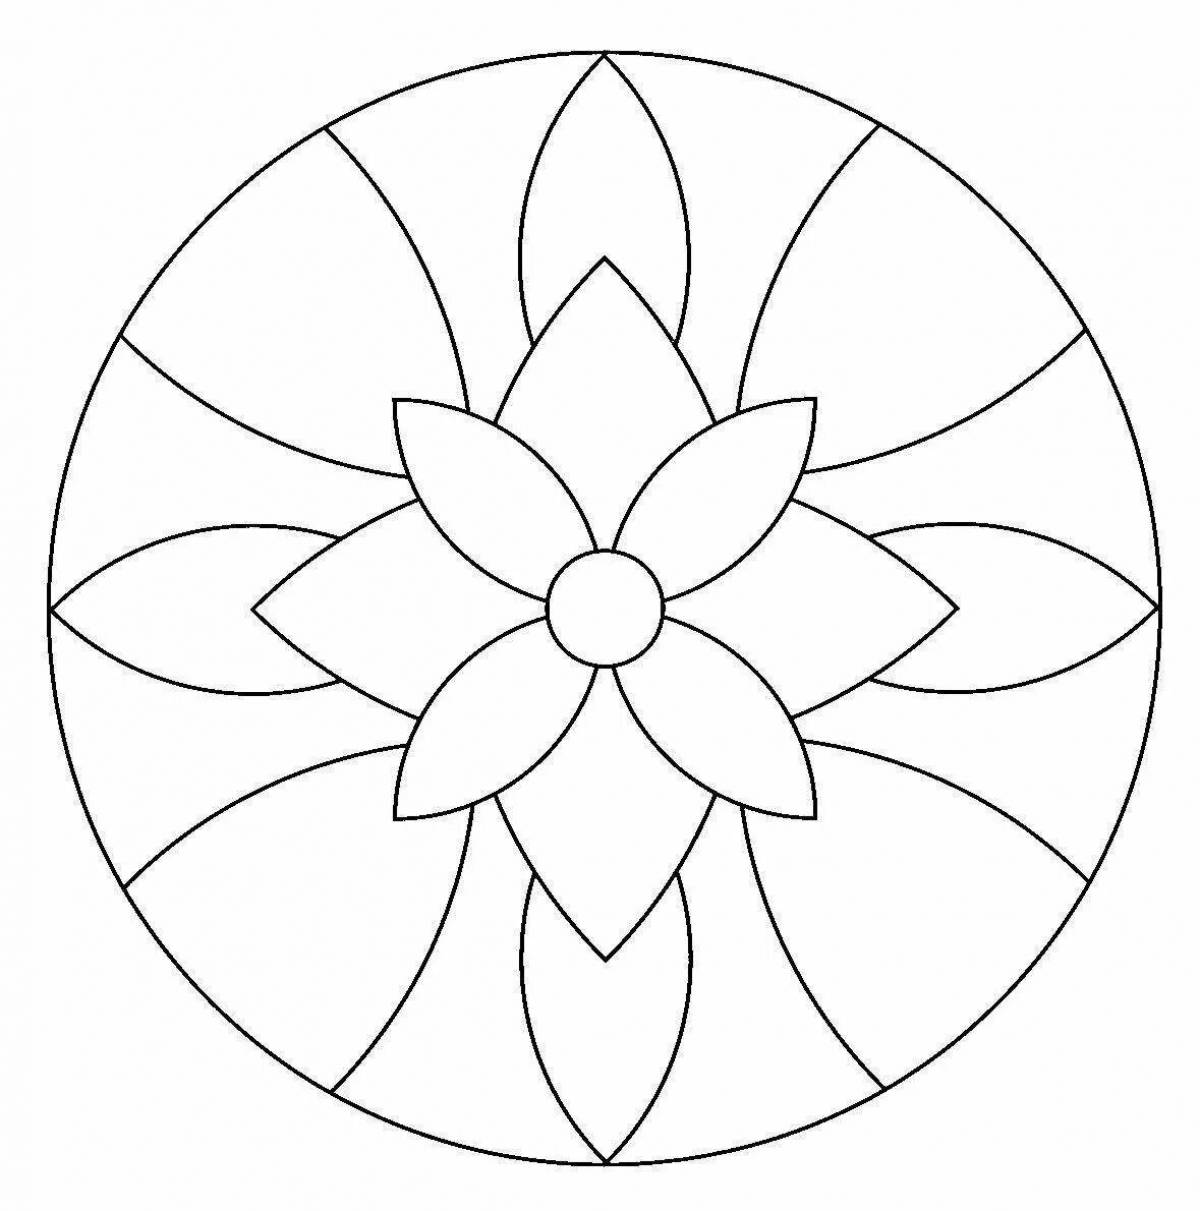 Coloring page with spectacular do circle